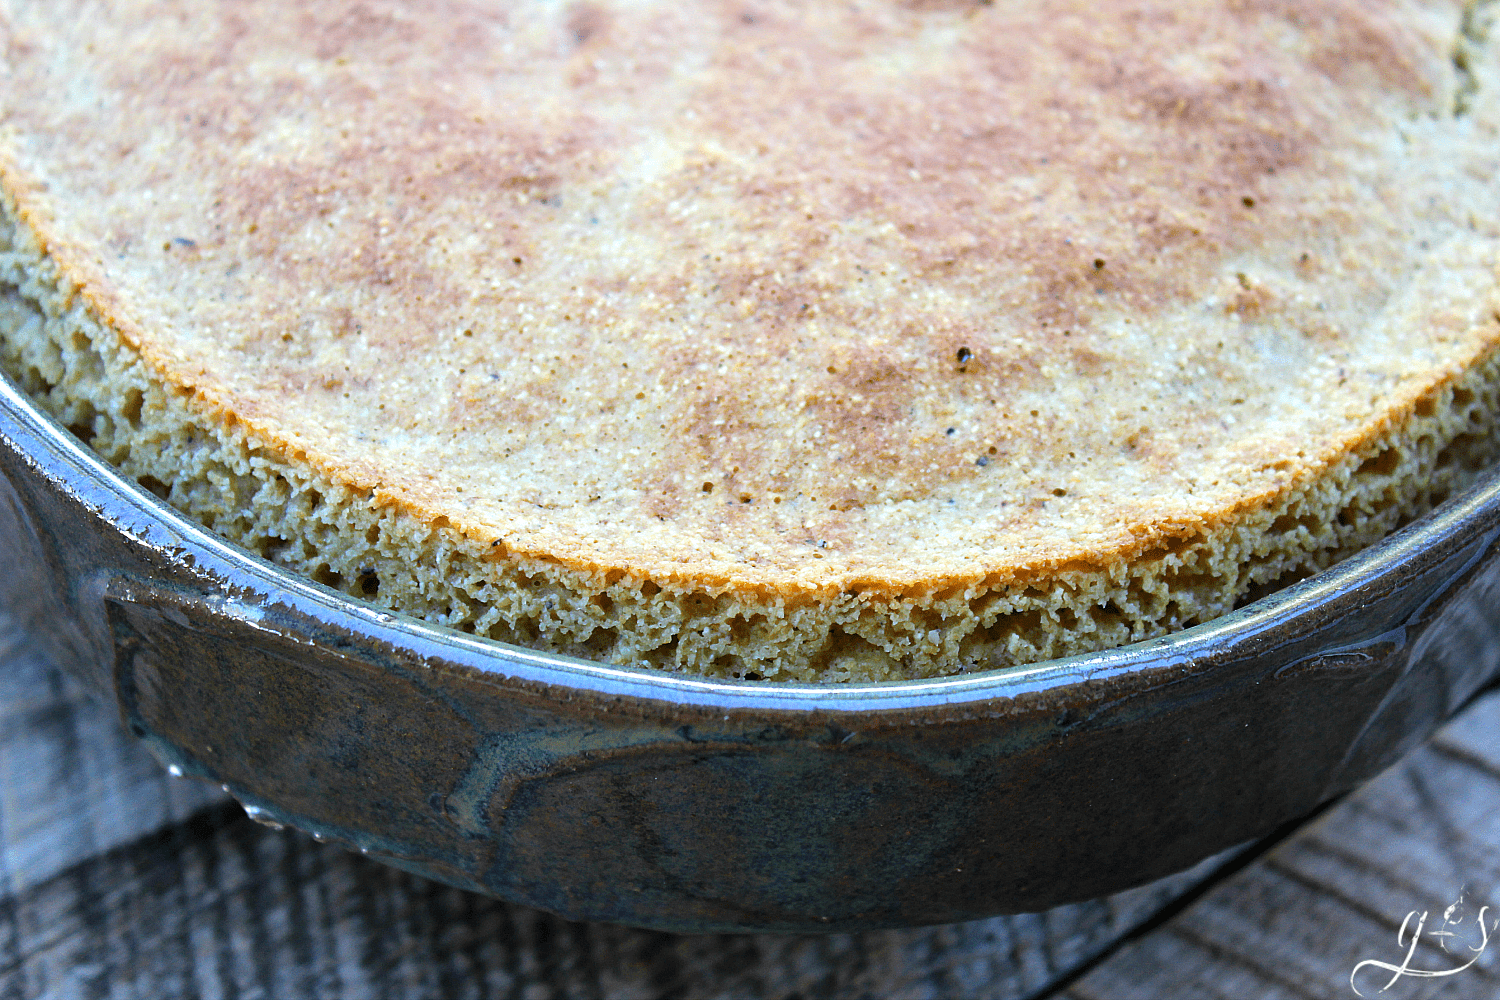 The BEST Clean Eating Maple Cornbread | Who says comfort food can't be healthy? This sweet yet savory and easy recipe is both gluten free and delicious. A homemade, low carb, and 21 Day Fix approved side dish for chili or soup. Oatmeal replaces white flour, plain Greek yogurt in place of oil, and maple syrup instead of white sugar. We have also tried it with whole wheat flour and it was amazing!